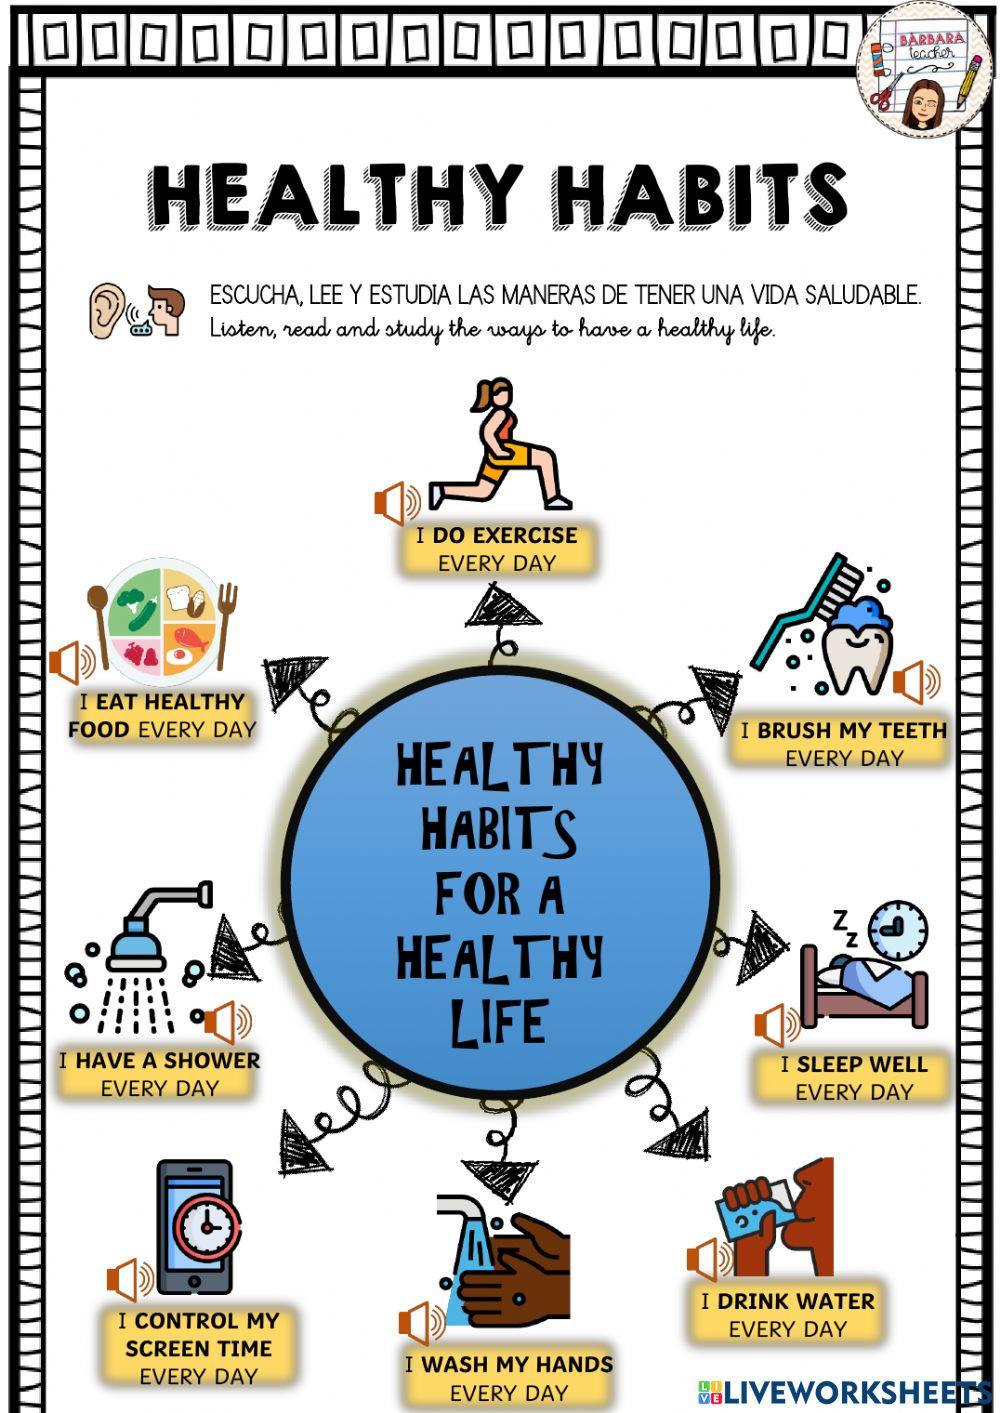 Healthy habits for a healthy life